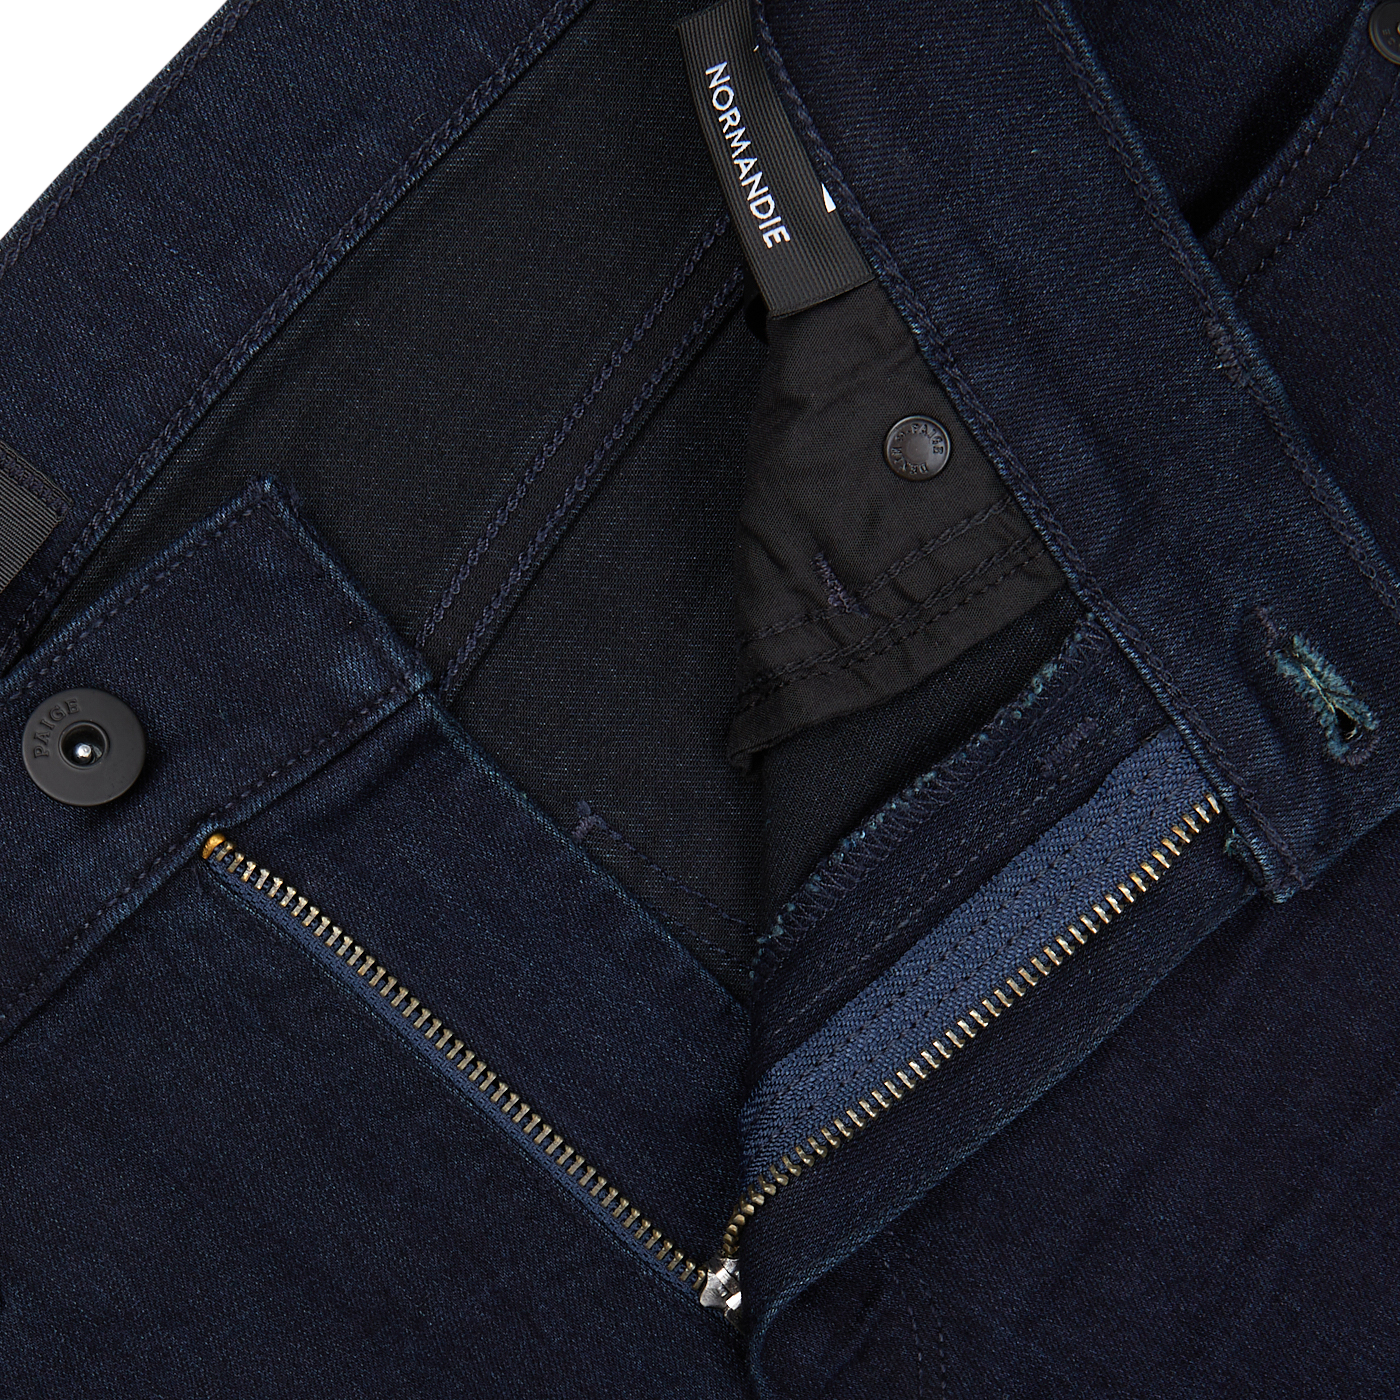 Dark Paige Transcend Normandie blue jeans with zipper fly and waistband button fastened, showcasing the brand label "normandie".